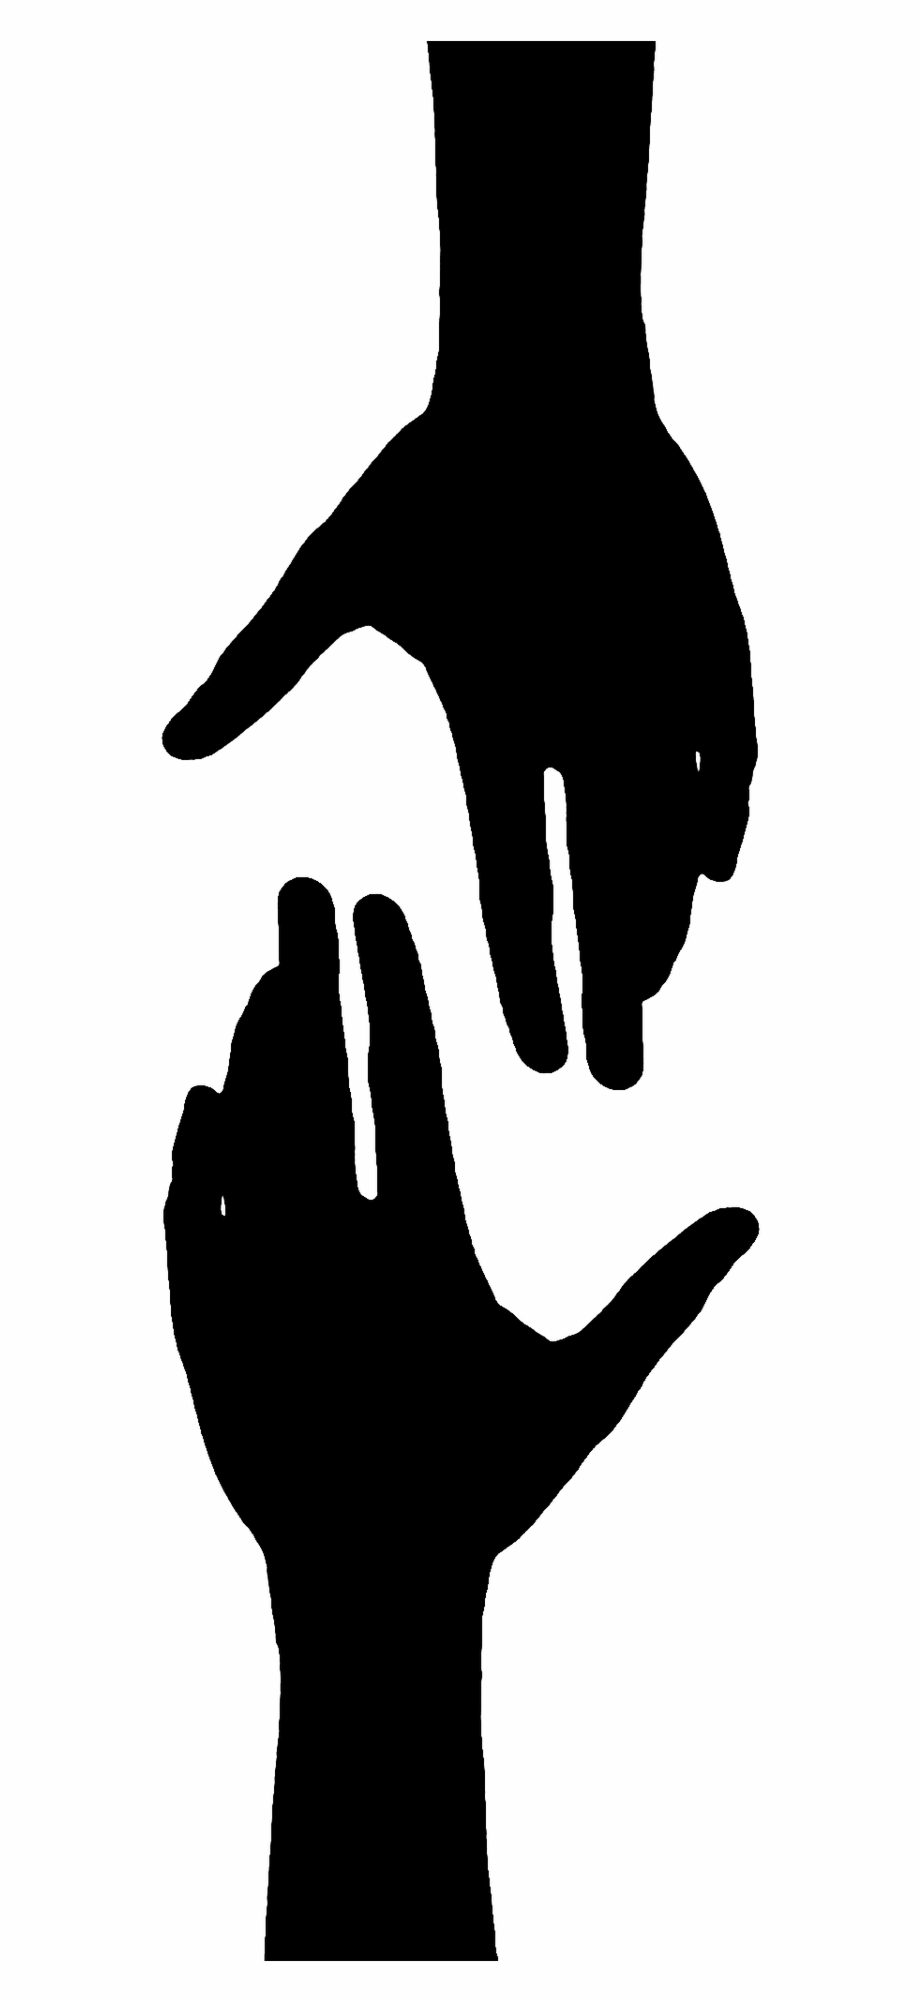 helping hand hand silhouette png
